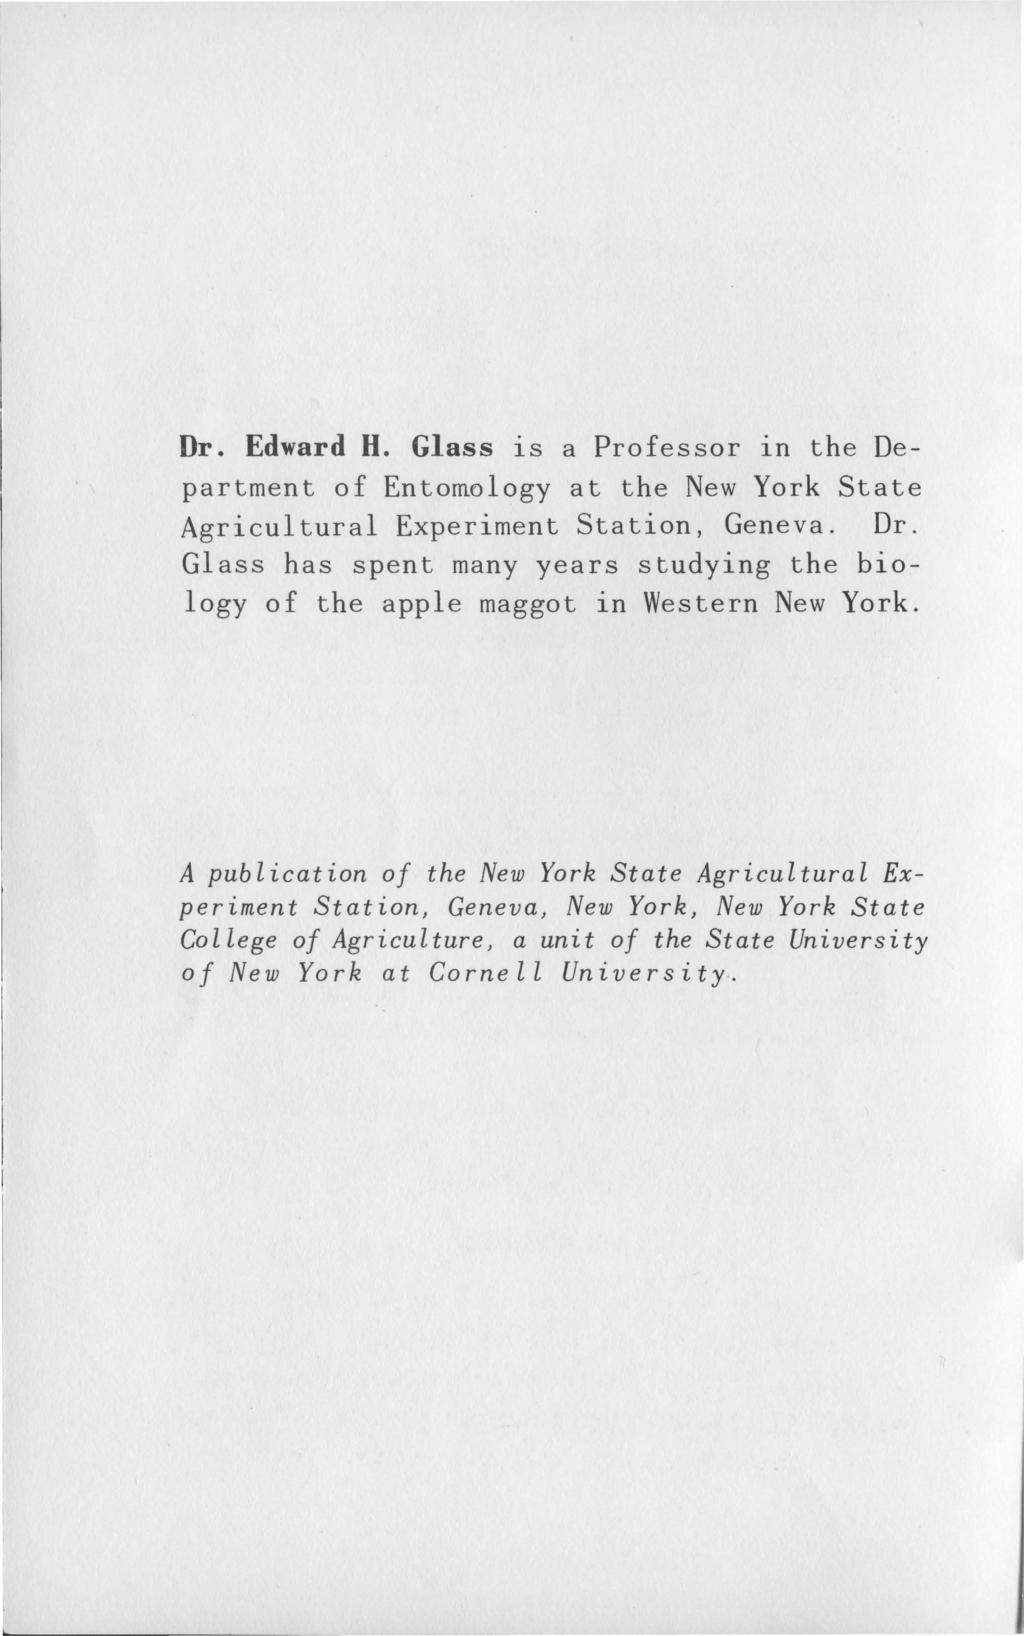 Dr. Edward H. Glass is a Professor in the Department of Entomology at the New York State Agricultural Experiment Station, Geneva. Dr.